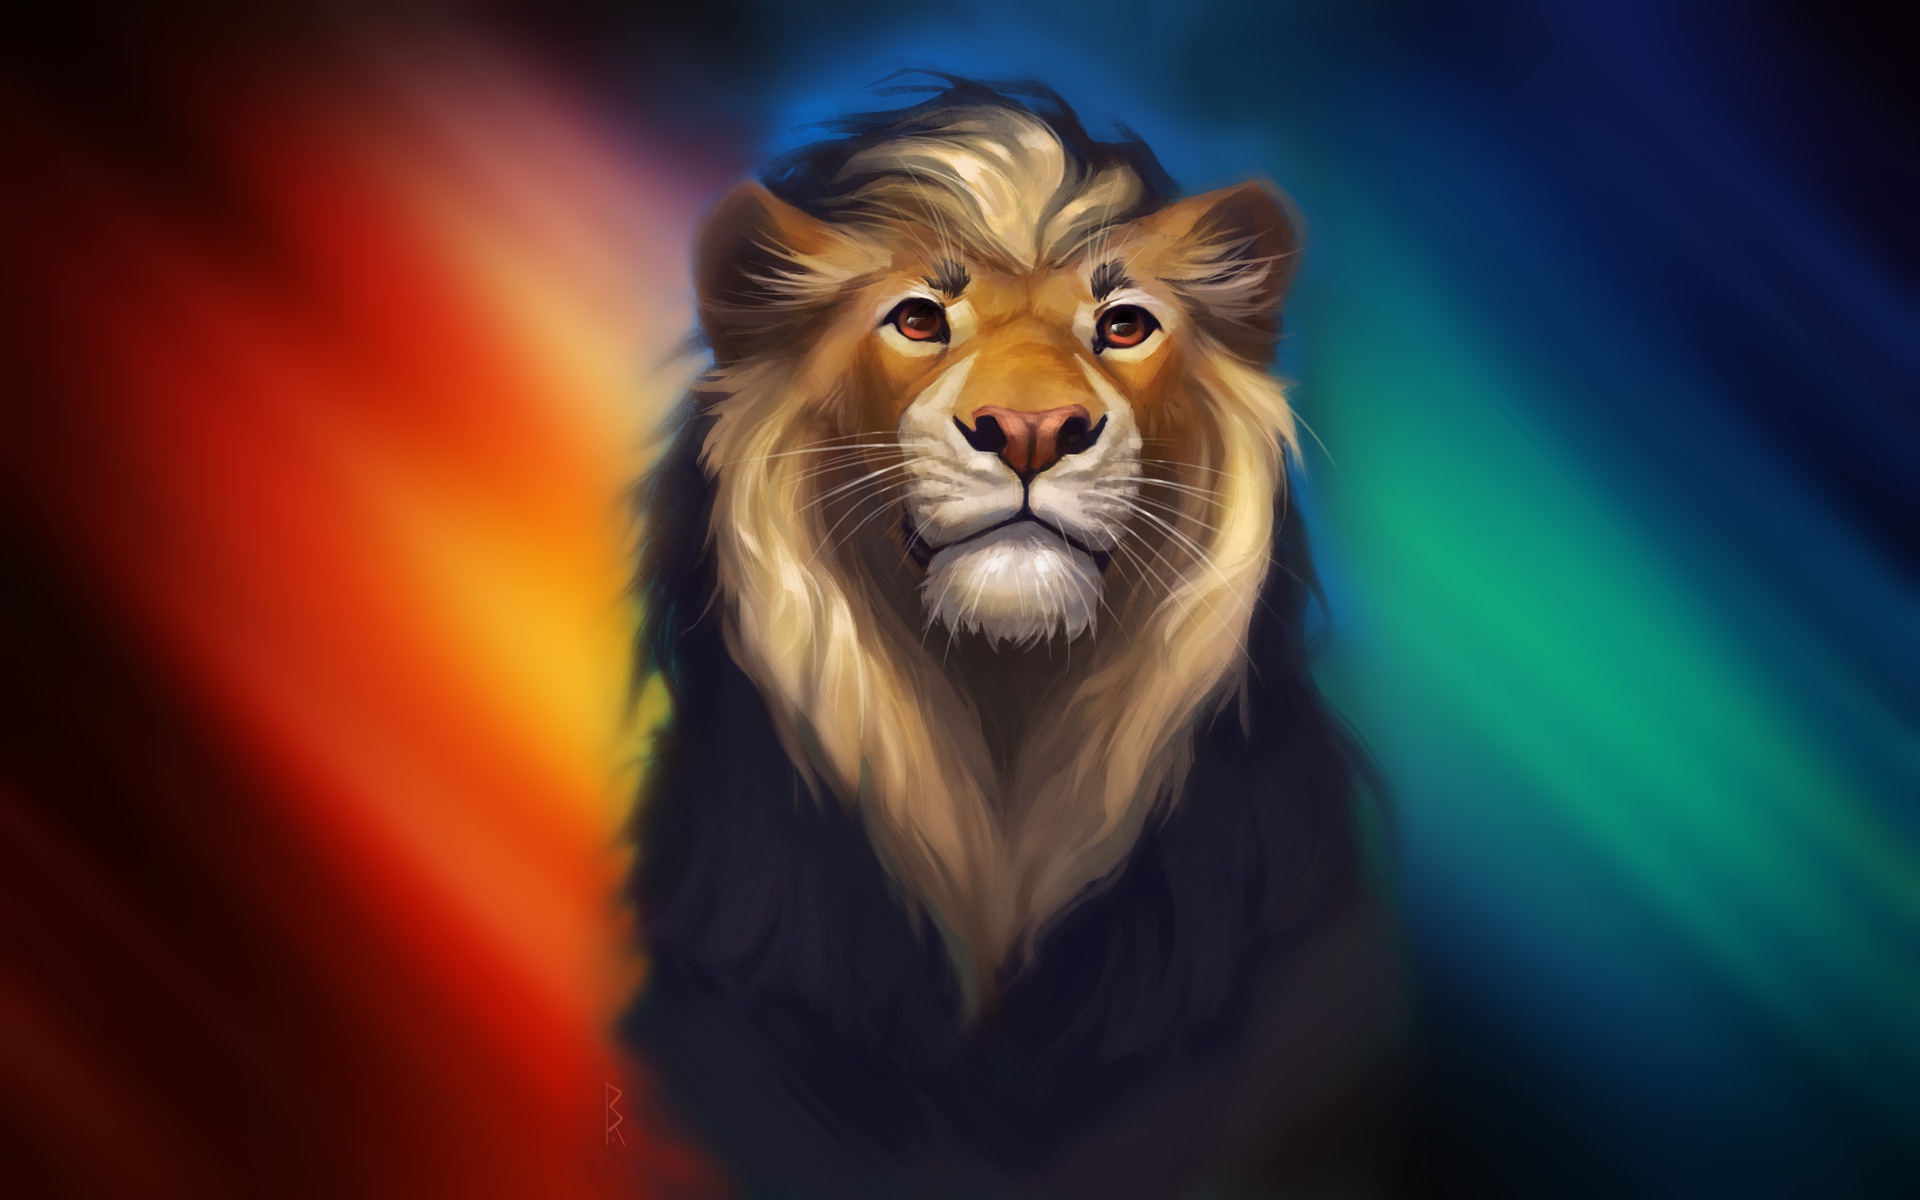 Wallpapers lion colorful rendering on the desktop